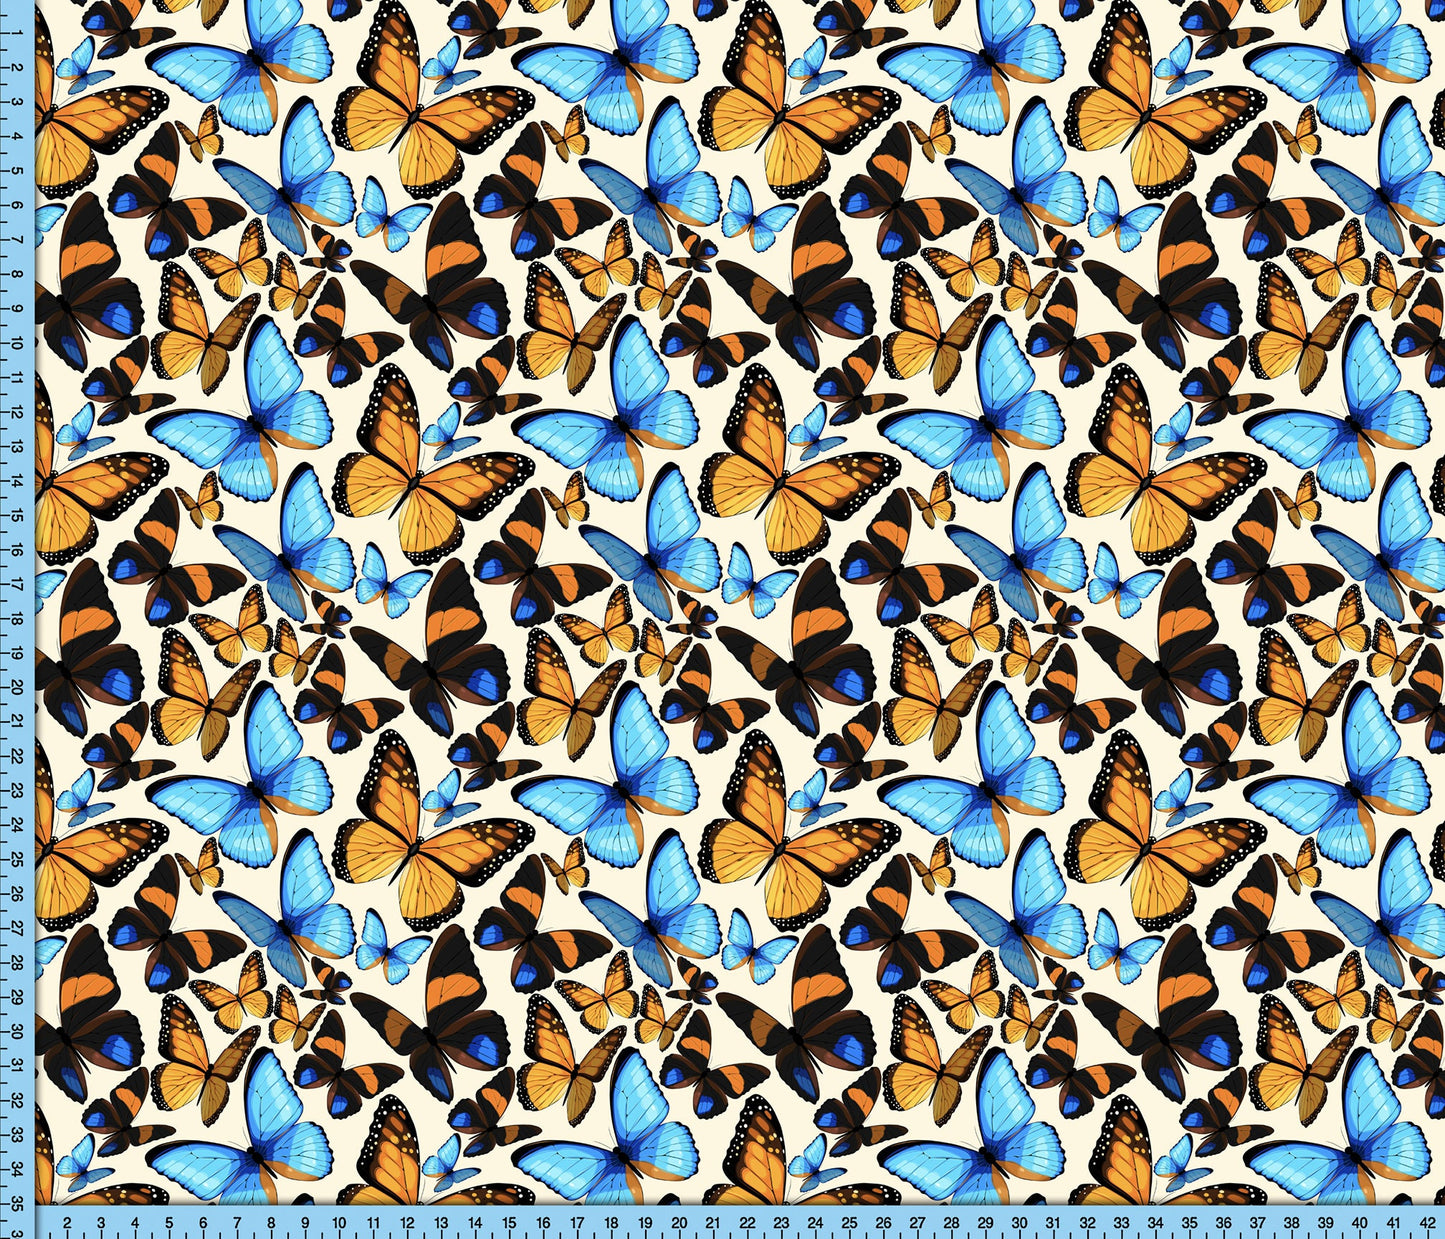 Butterflies Fabric Printed by the Yard, Orange and Blue Cottagecore Design for Crafts, Upholstery, Clothing